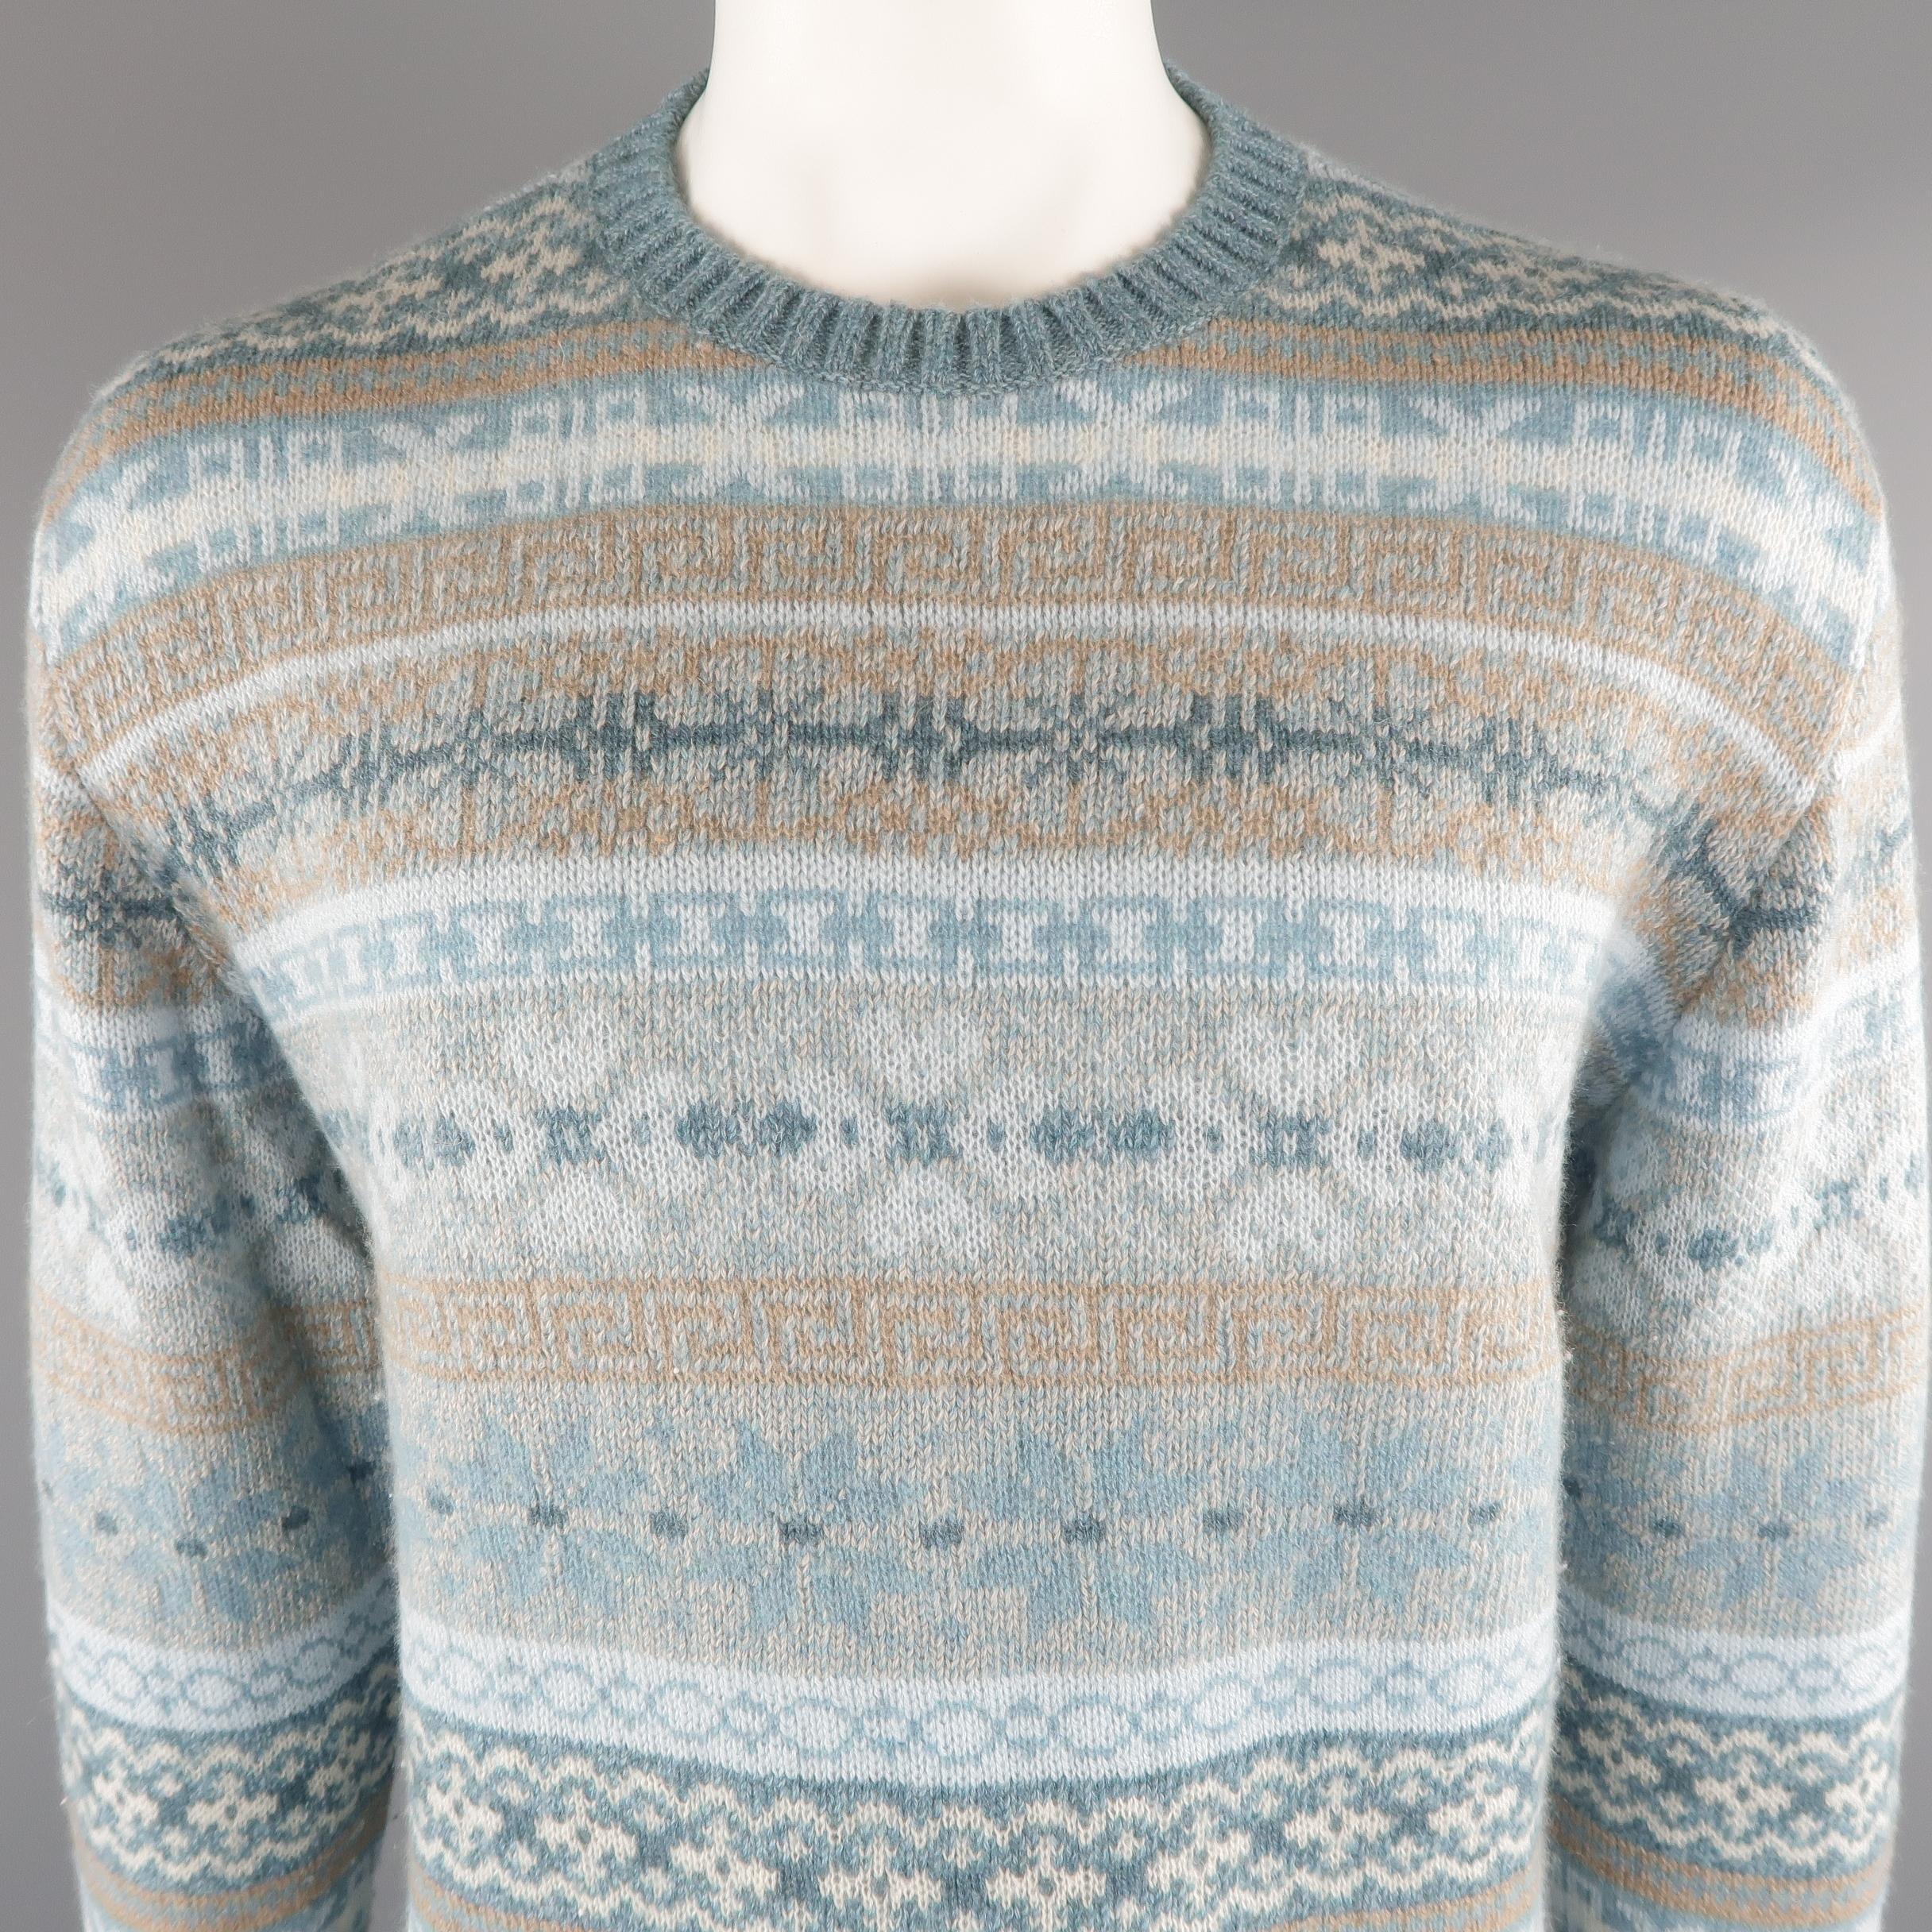 LORO PIANA  sweater comes in an oatmeal tone in 100% cashmere material, fairisle, ribbed knit, with a crewneck and ribbed cuff and waistband. Made in Italy.
 
Excellent Pre-Owned Condition.
Marked: 54 IT
 
Measurements:
 
Shoulder: 19 in.
Chest: 48